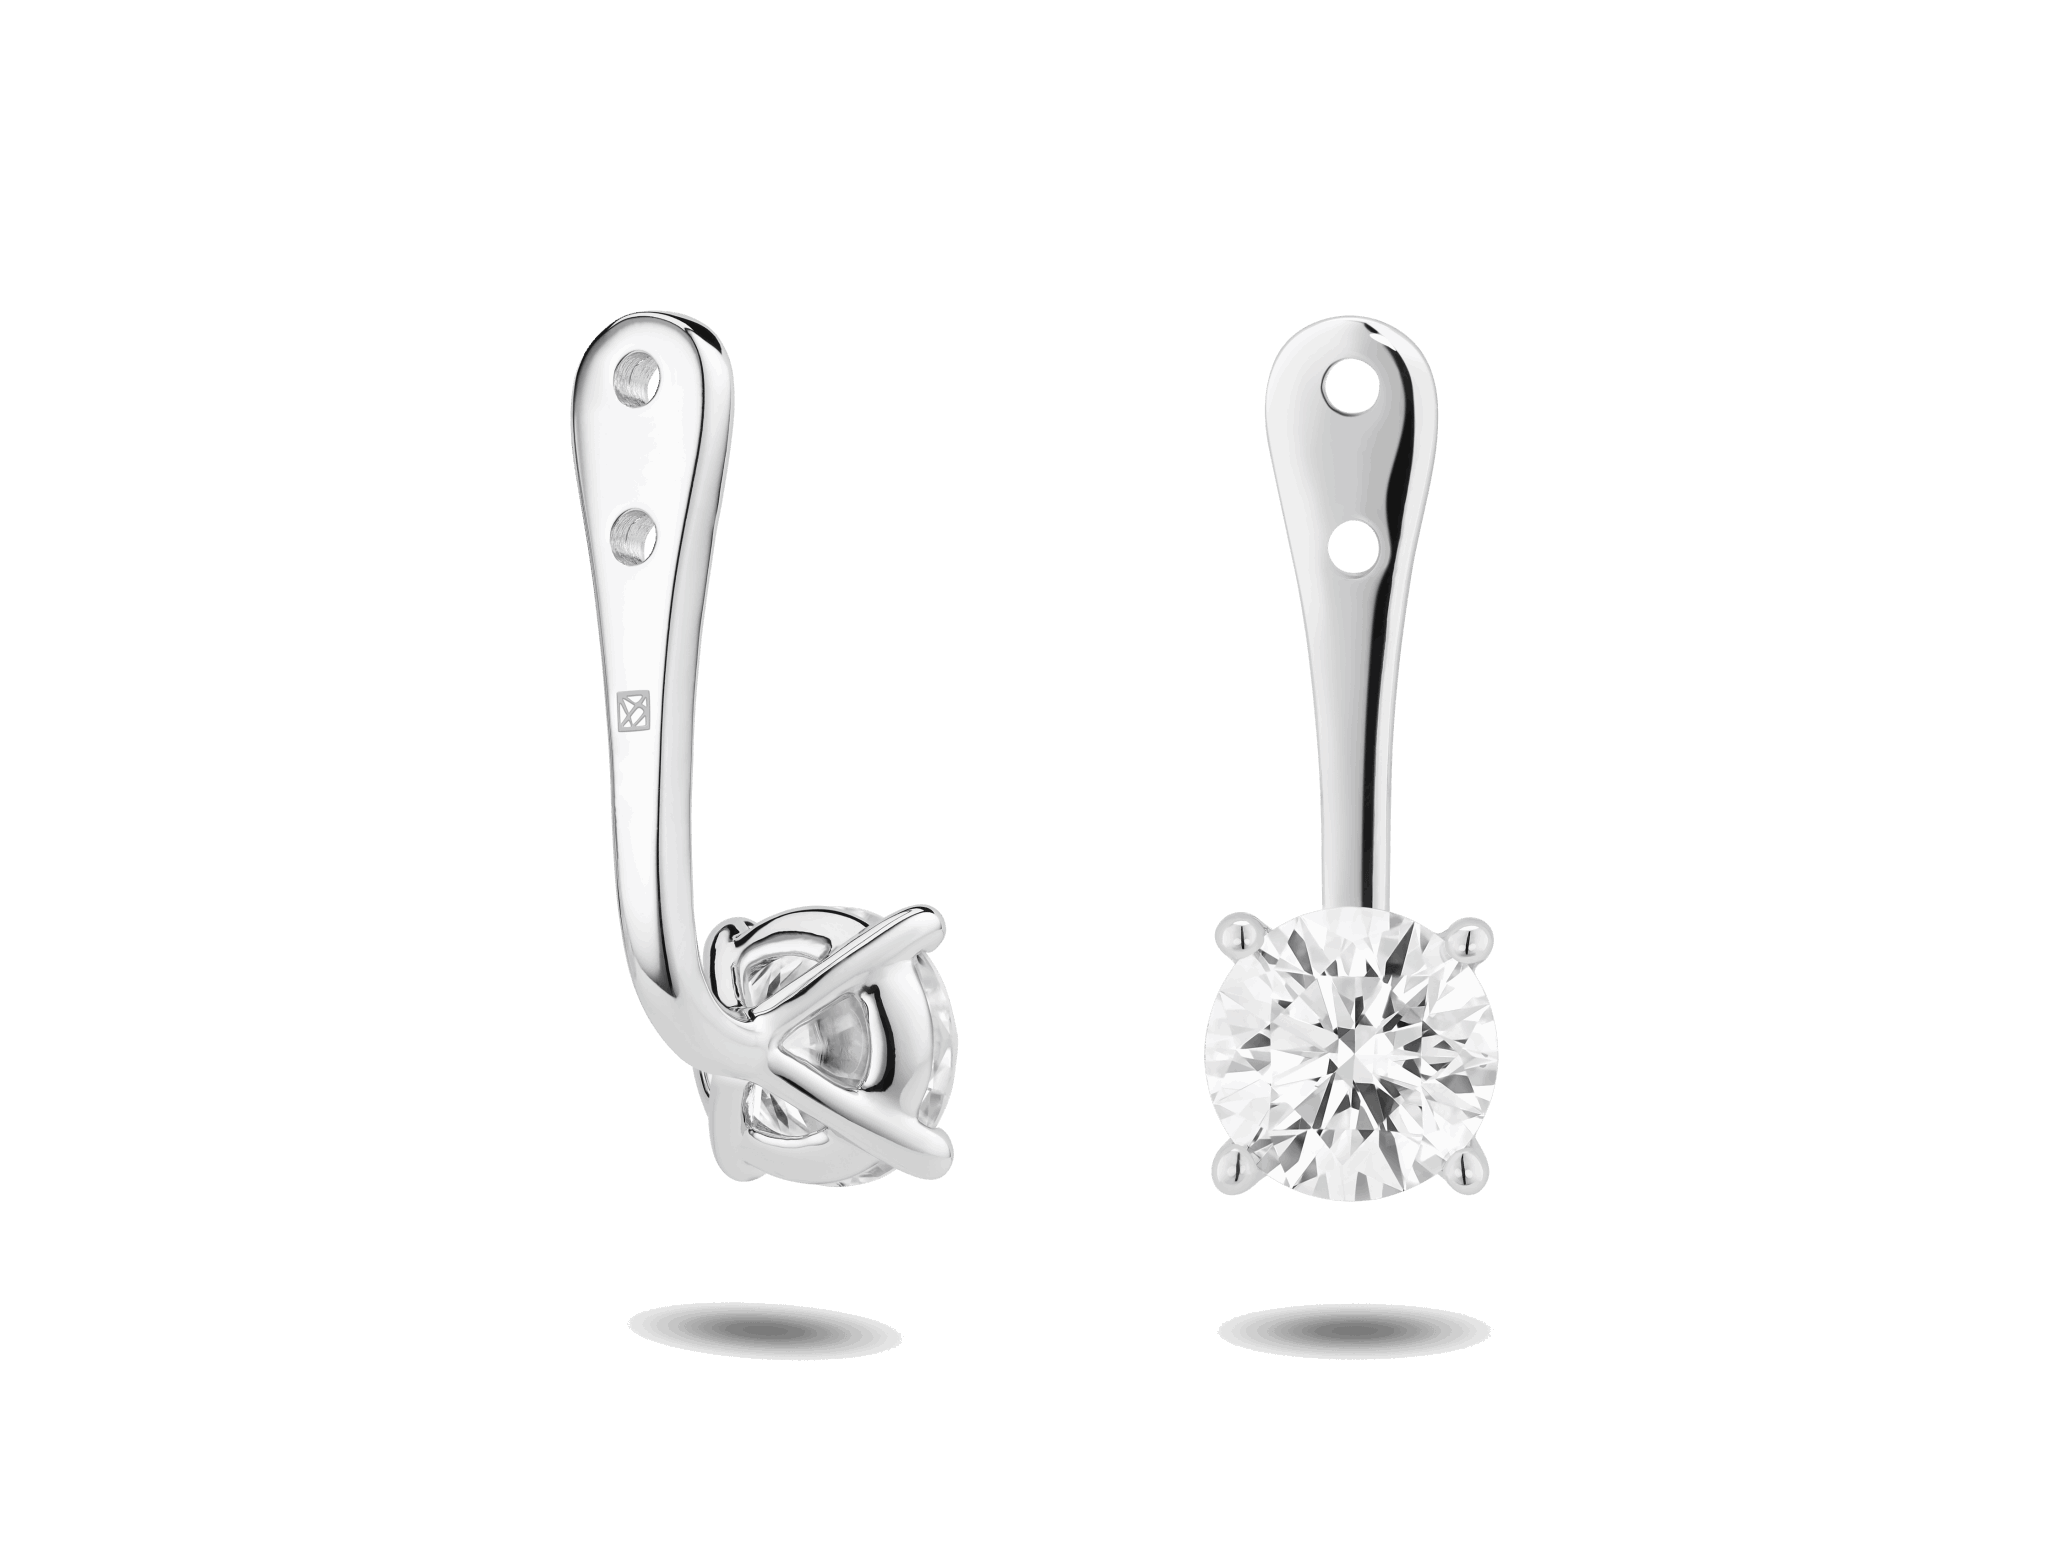 Lab-Grown Diamond 1ct. tw. Round Brilliant Solitaire Ear Jacket Earrings | White - #Lightbox Jewelry#